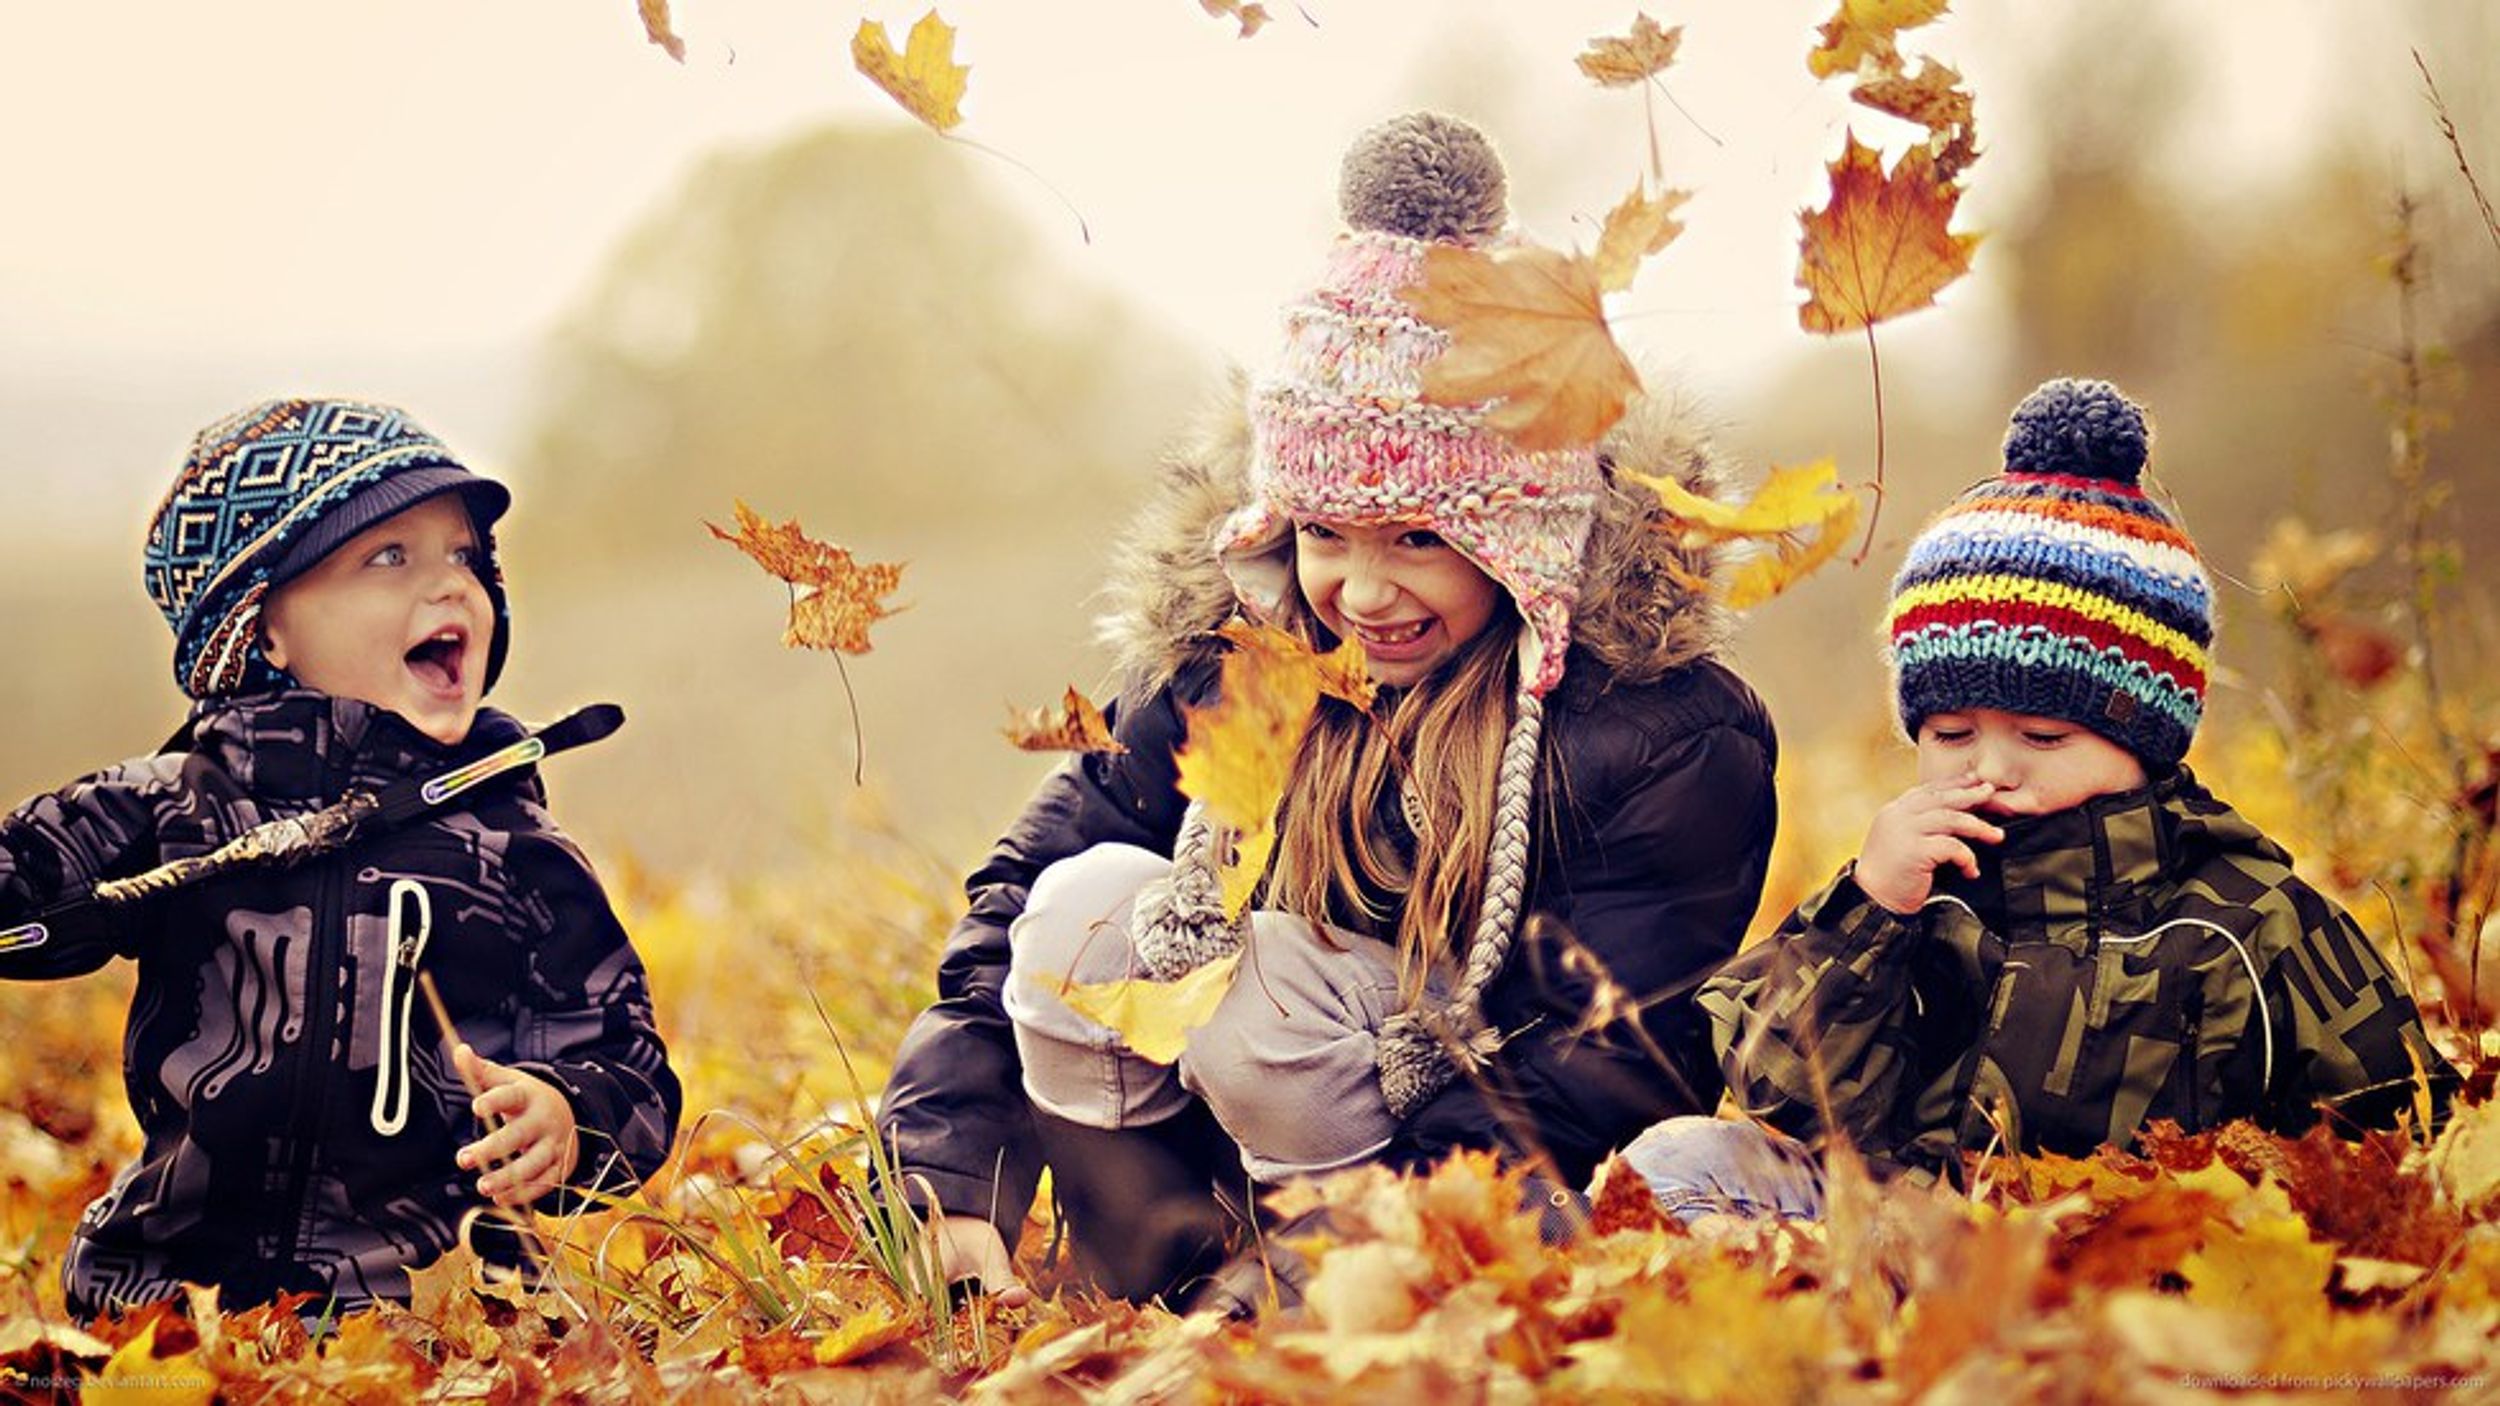 What's On Your Fall Bucket List?